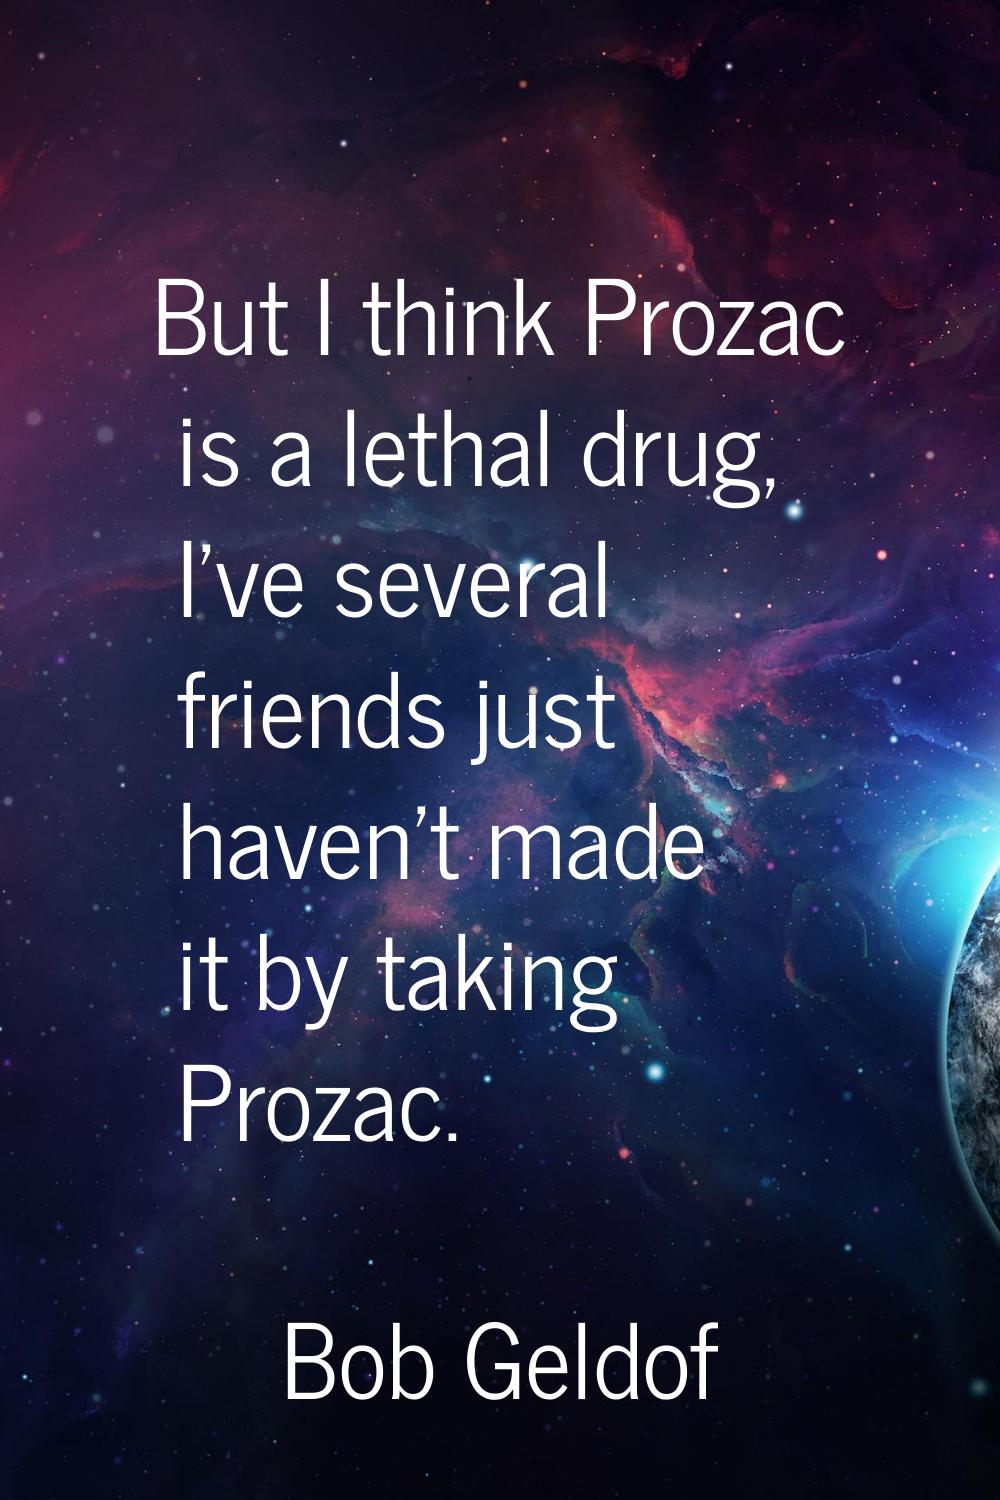 But I think Prozac is a lethal drug, I've several friends just haven't made it by taking Prozac.